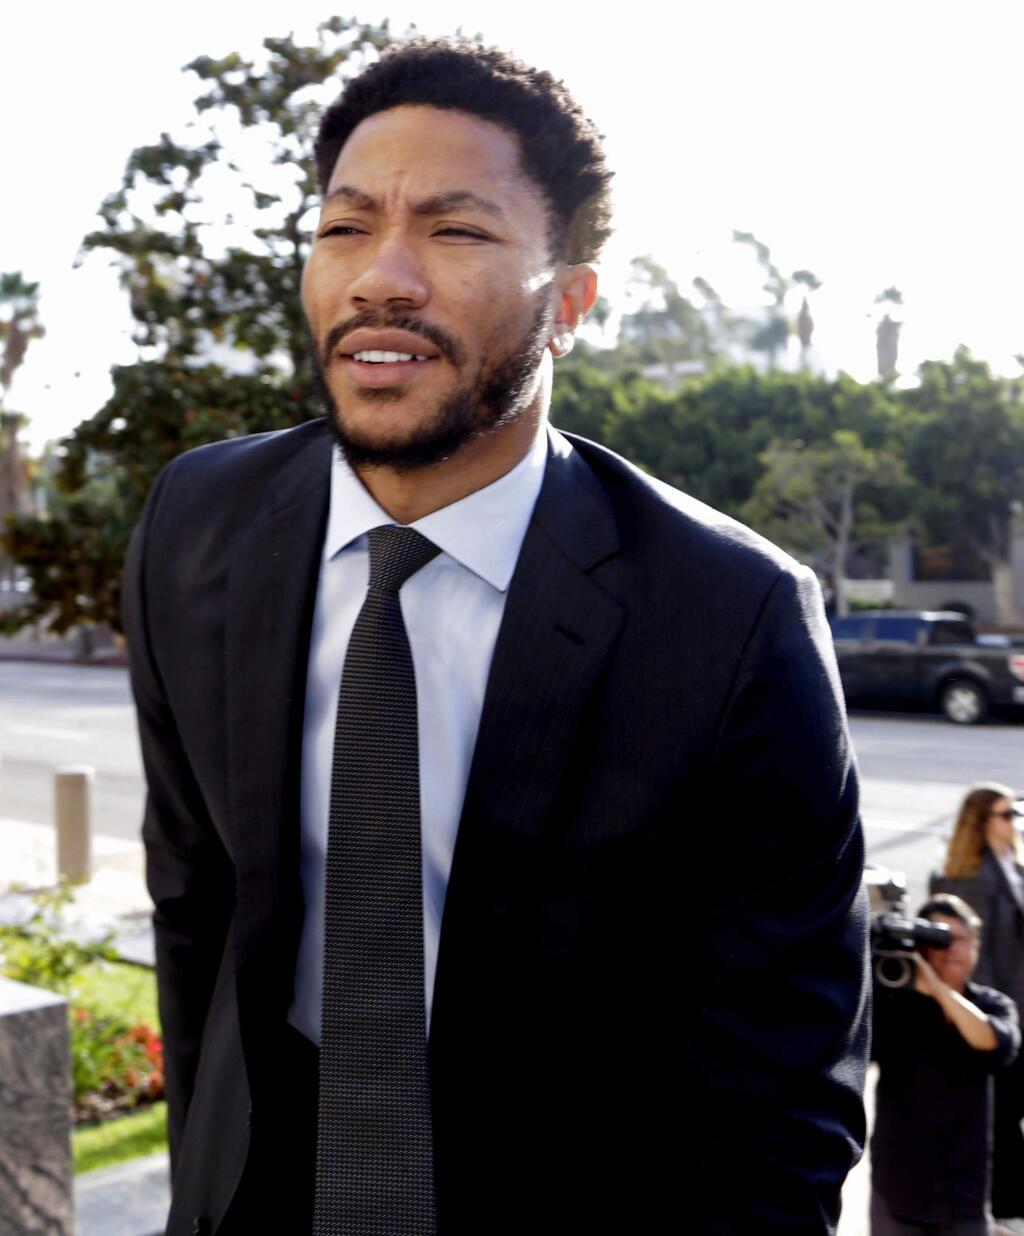 Derrick Rose arrives at Federal Court in Los Angeles, Tuesday, Oct. 18, 2016. Testimony is scheduled to resume in the lawsuit against Rose and two friends by a woman who claims she was raped while incapacitated three years ago. (AP Photo/Nick Ut)